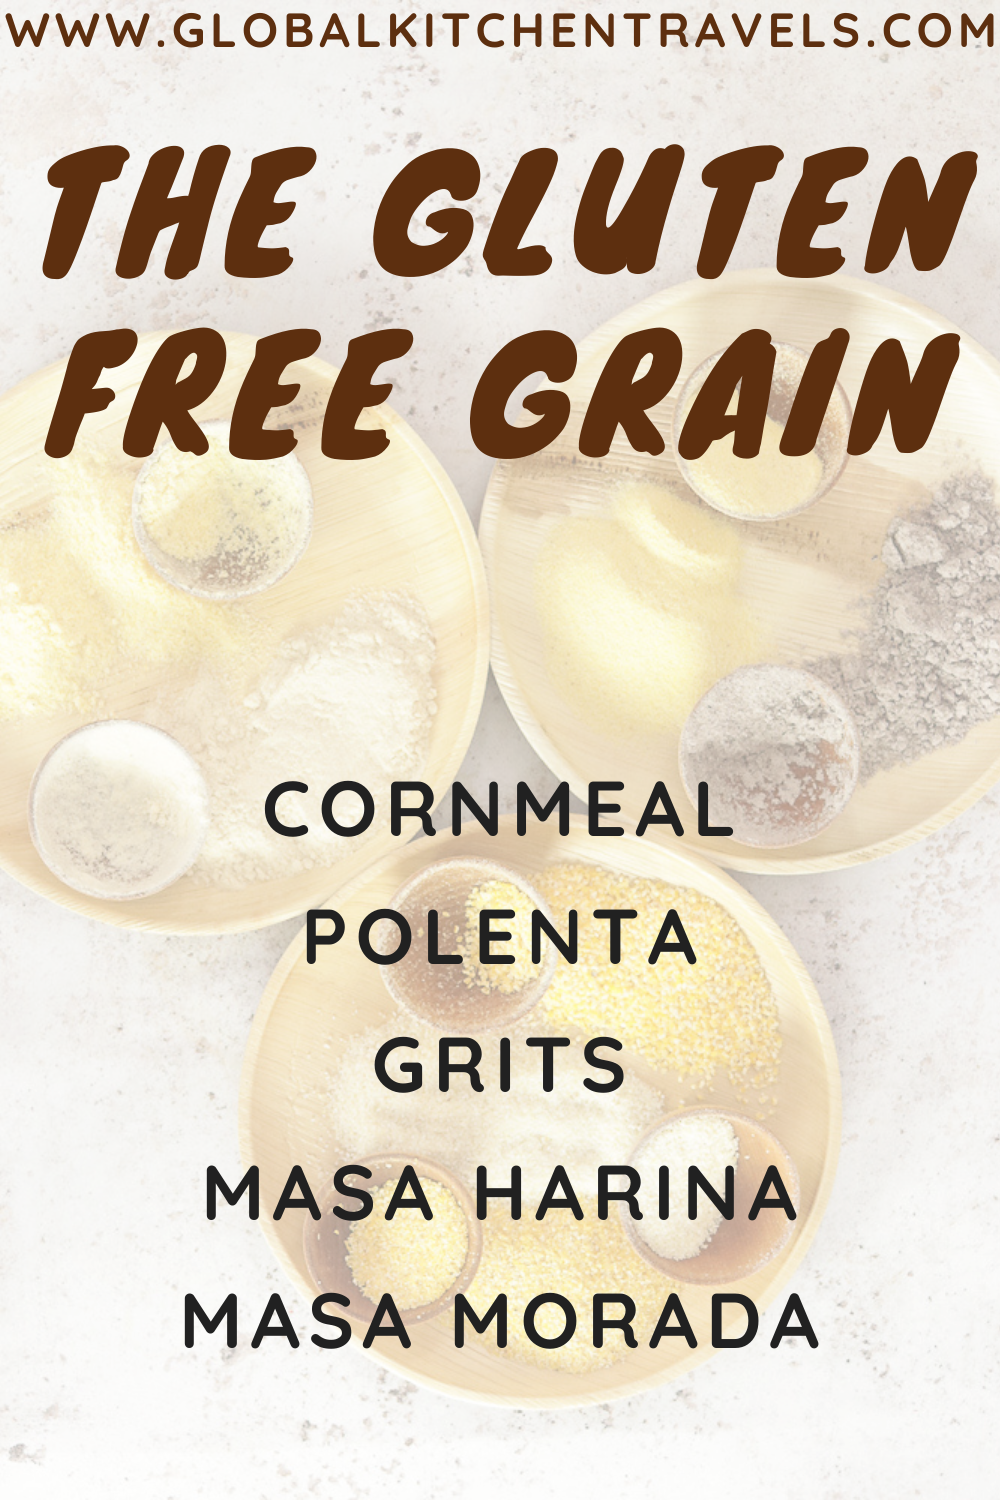 Text about cornmeal the gluten free grain